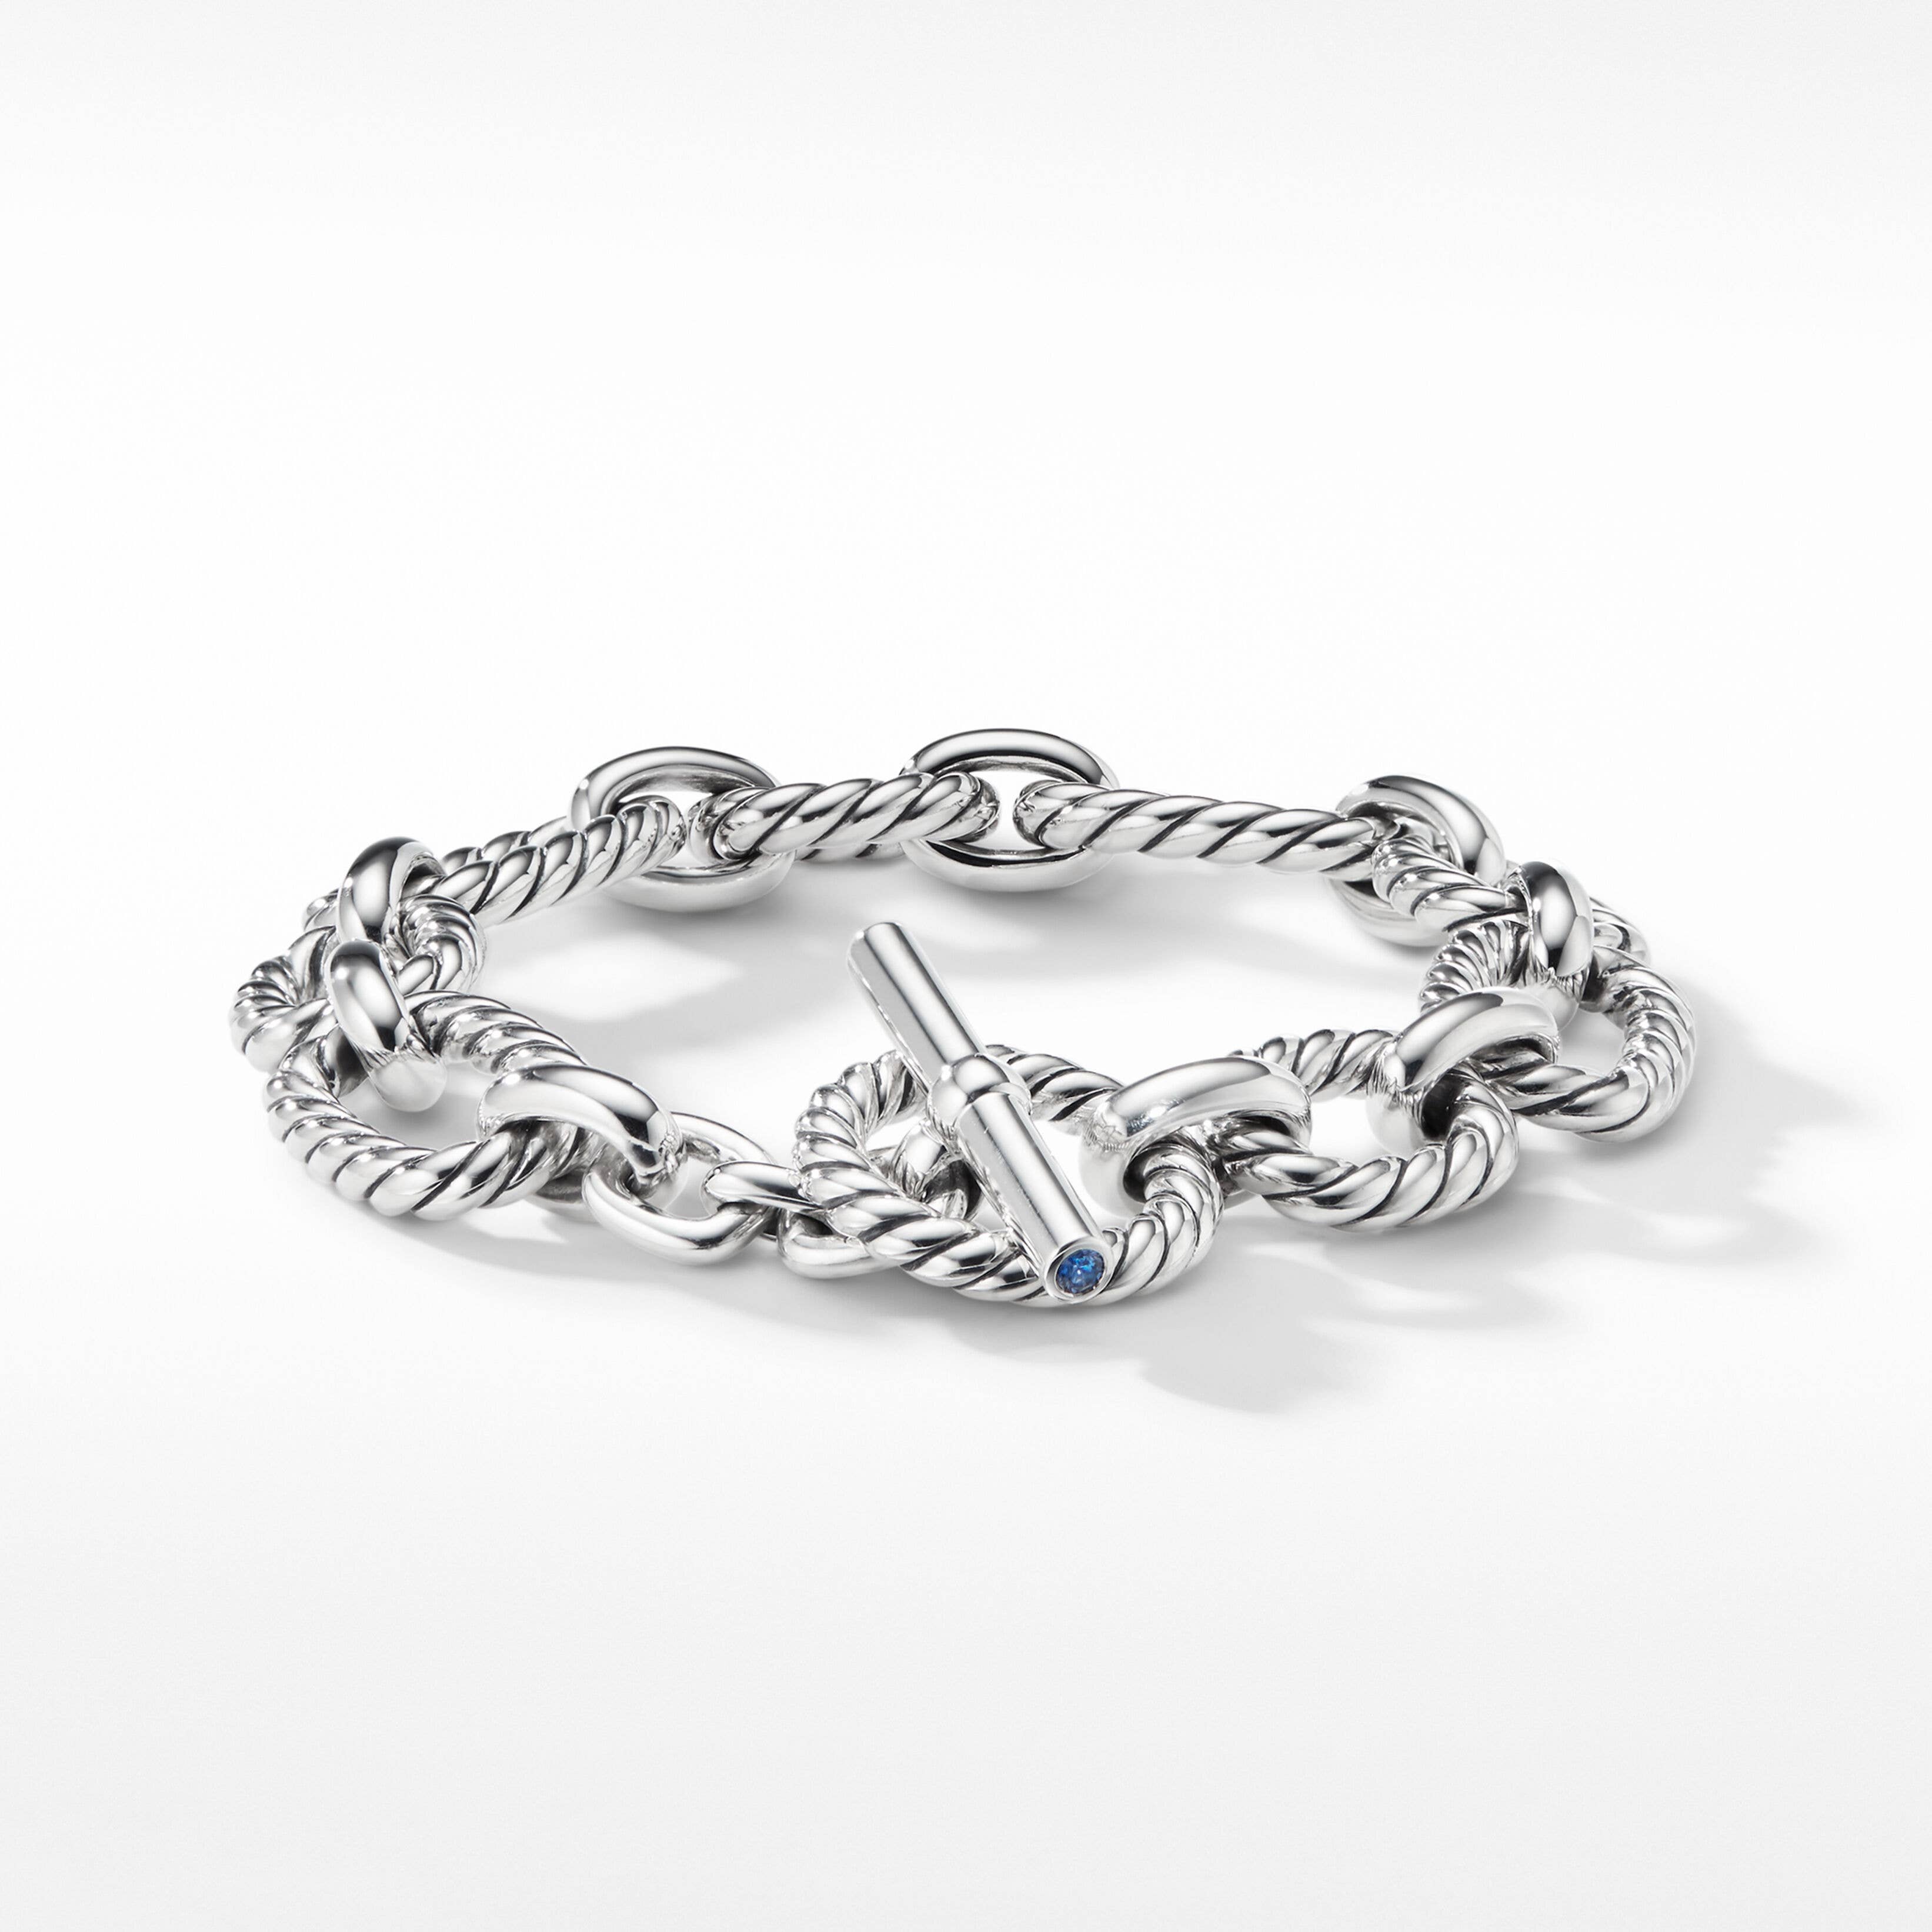 Cushion Link Chain Bracelet in Sterling Silver with Blue Sapphires